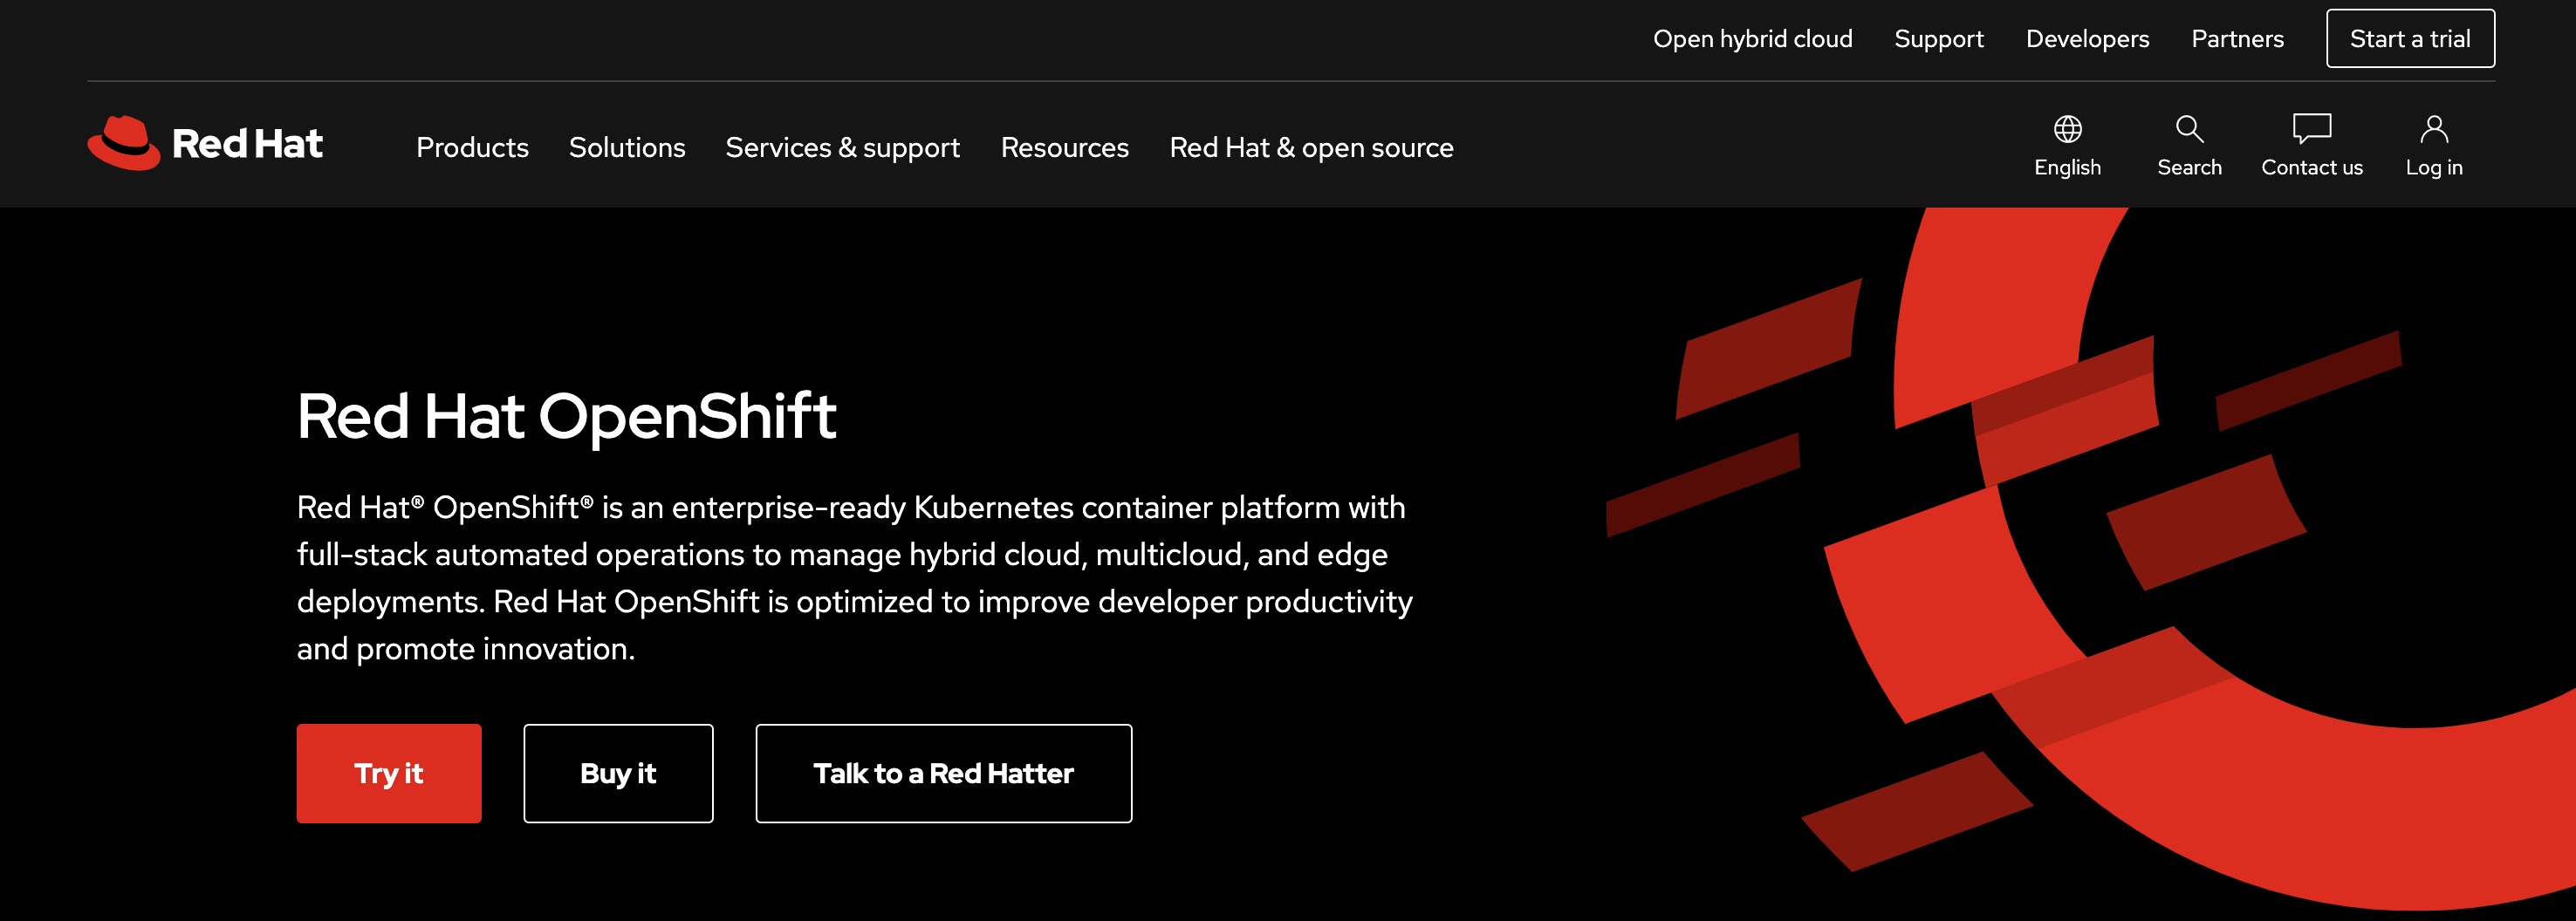 Red hat openshift